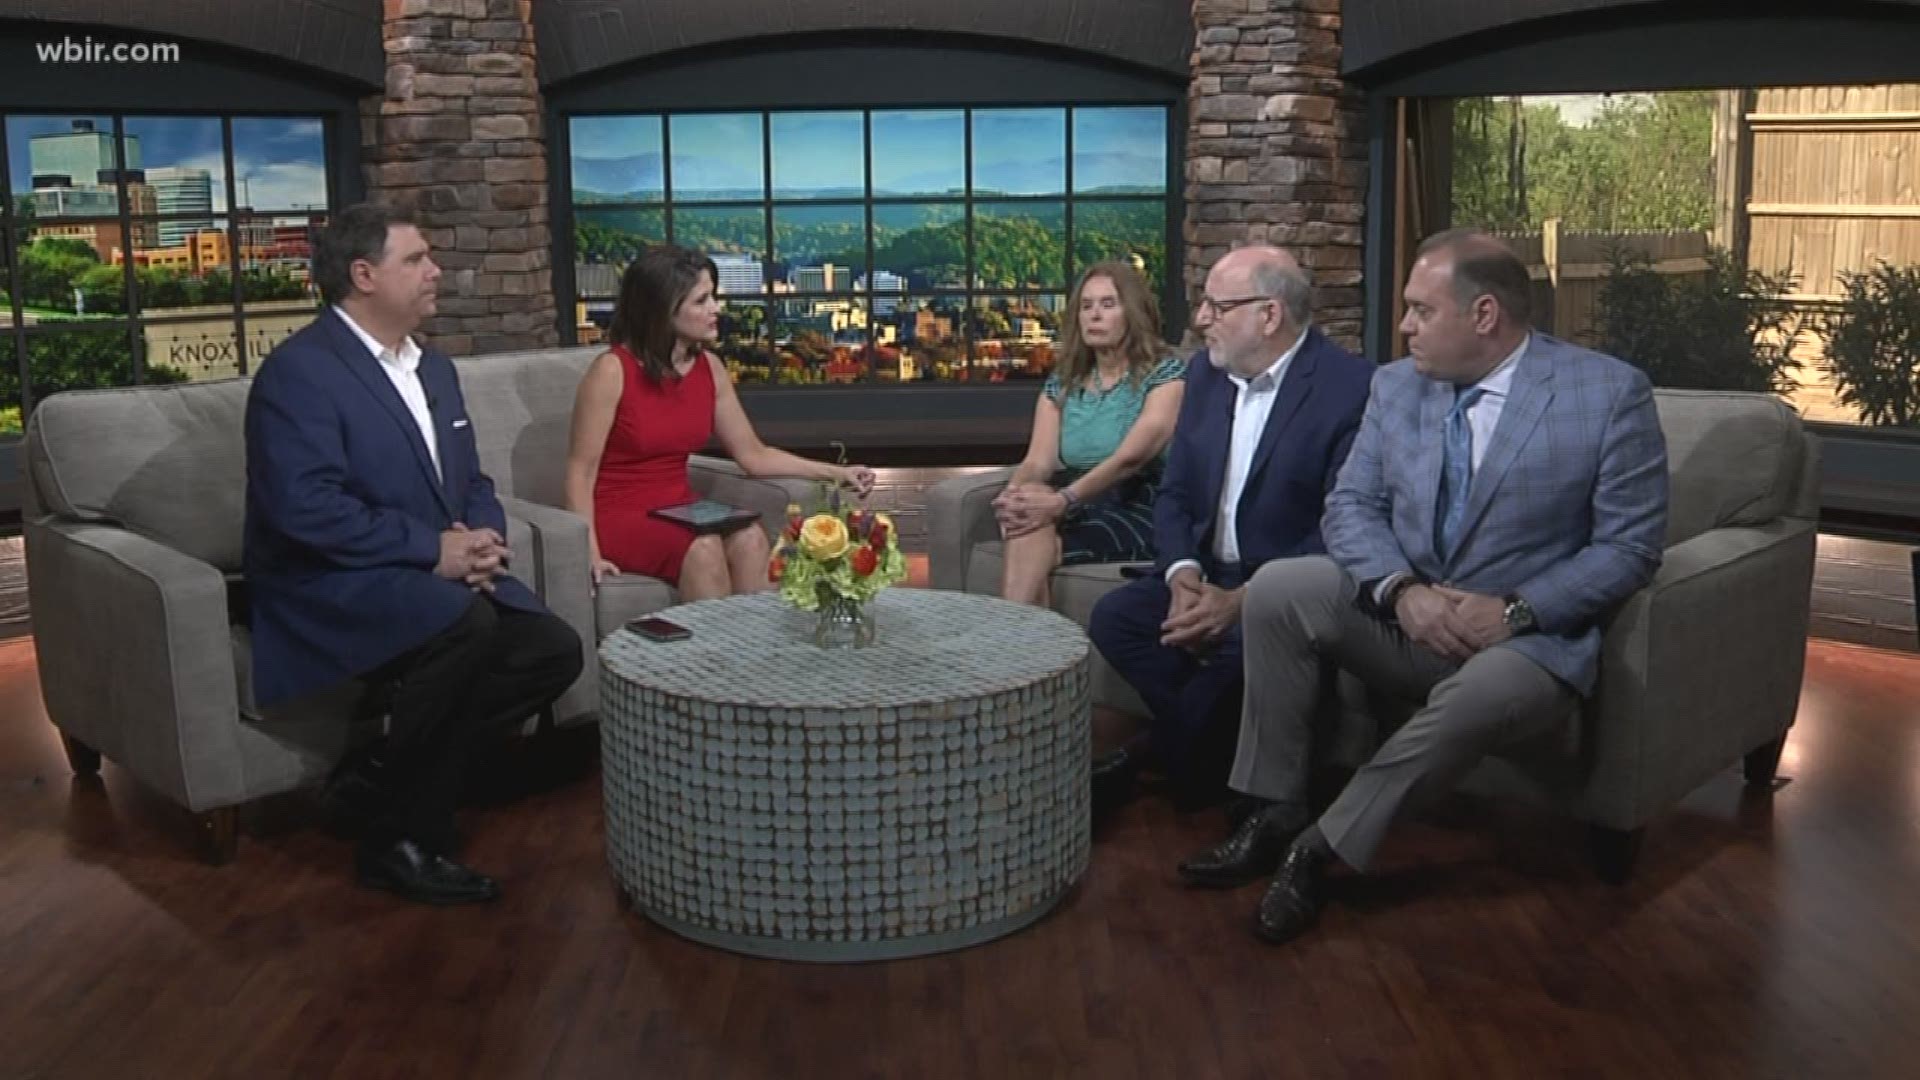 May 2, 2018: Inside Tennessee panelists Susan Richardson Williams, Mike Cohen and Don Bosch react to the firing of University of Tennessee Chancellor Beverly Davenport.